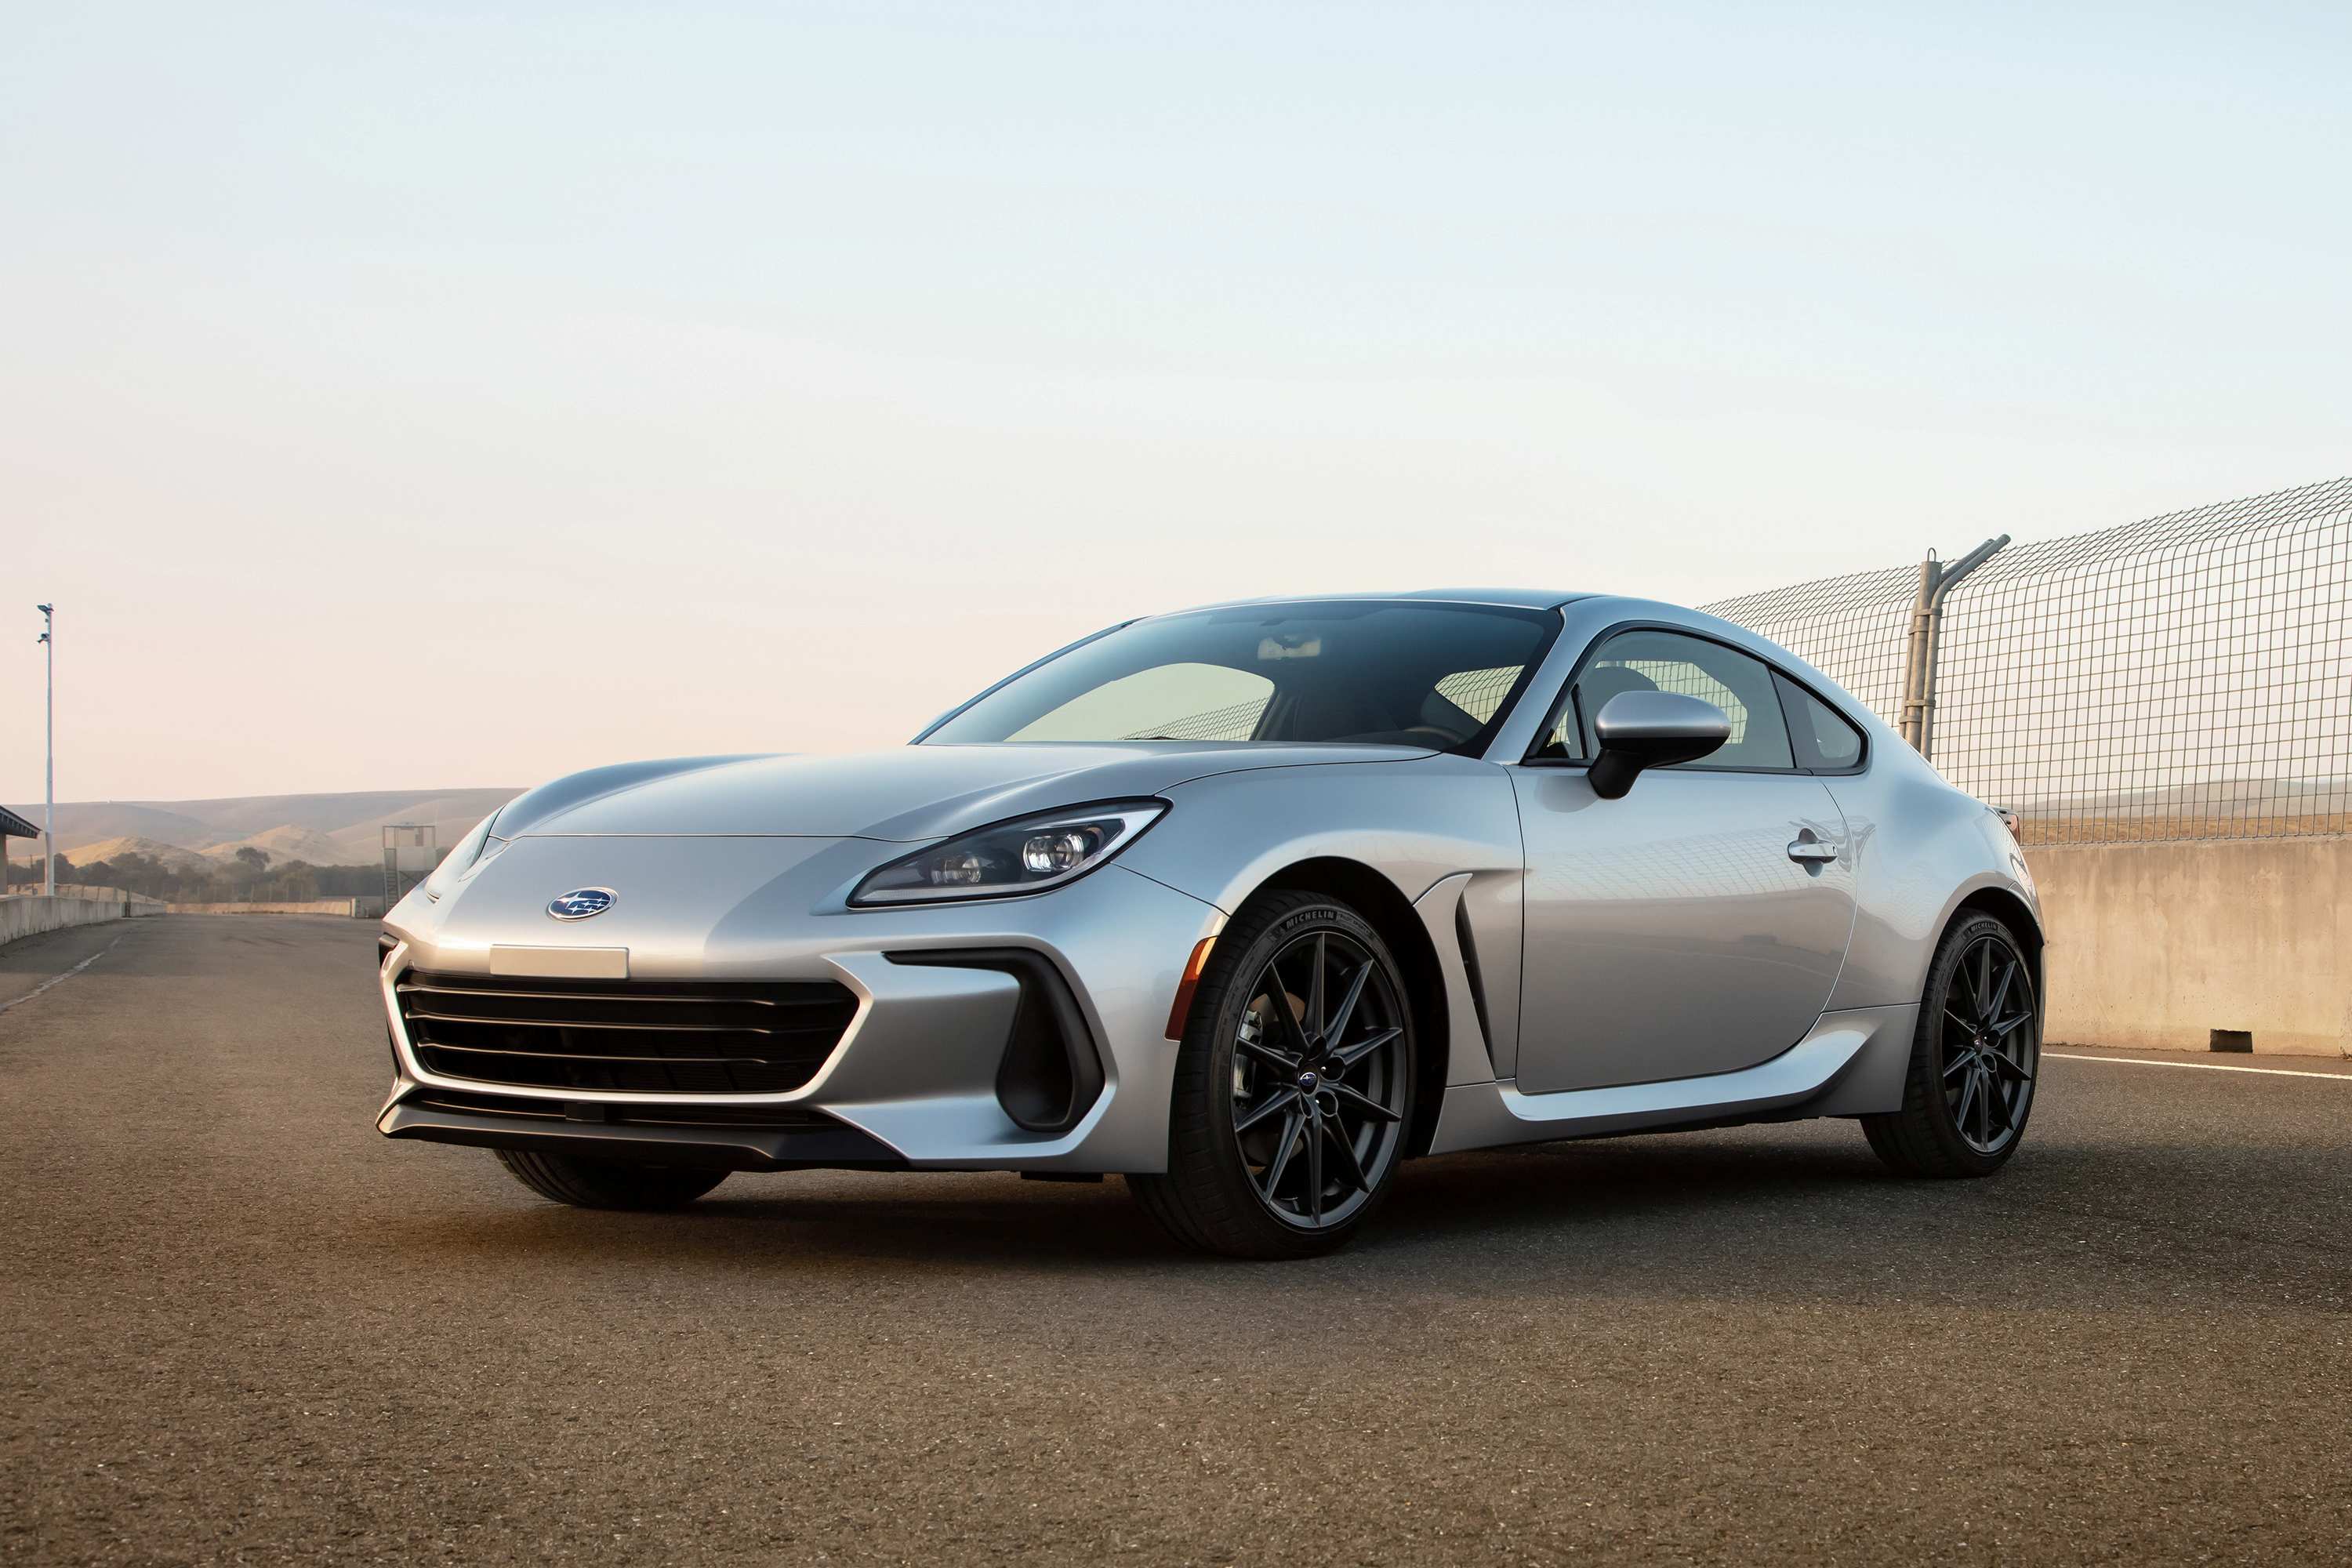 Subaru's second generation BRZ sports coupe set pulses racing overnight when it was unveiled in the United States.